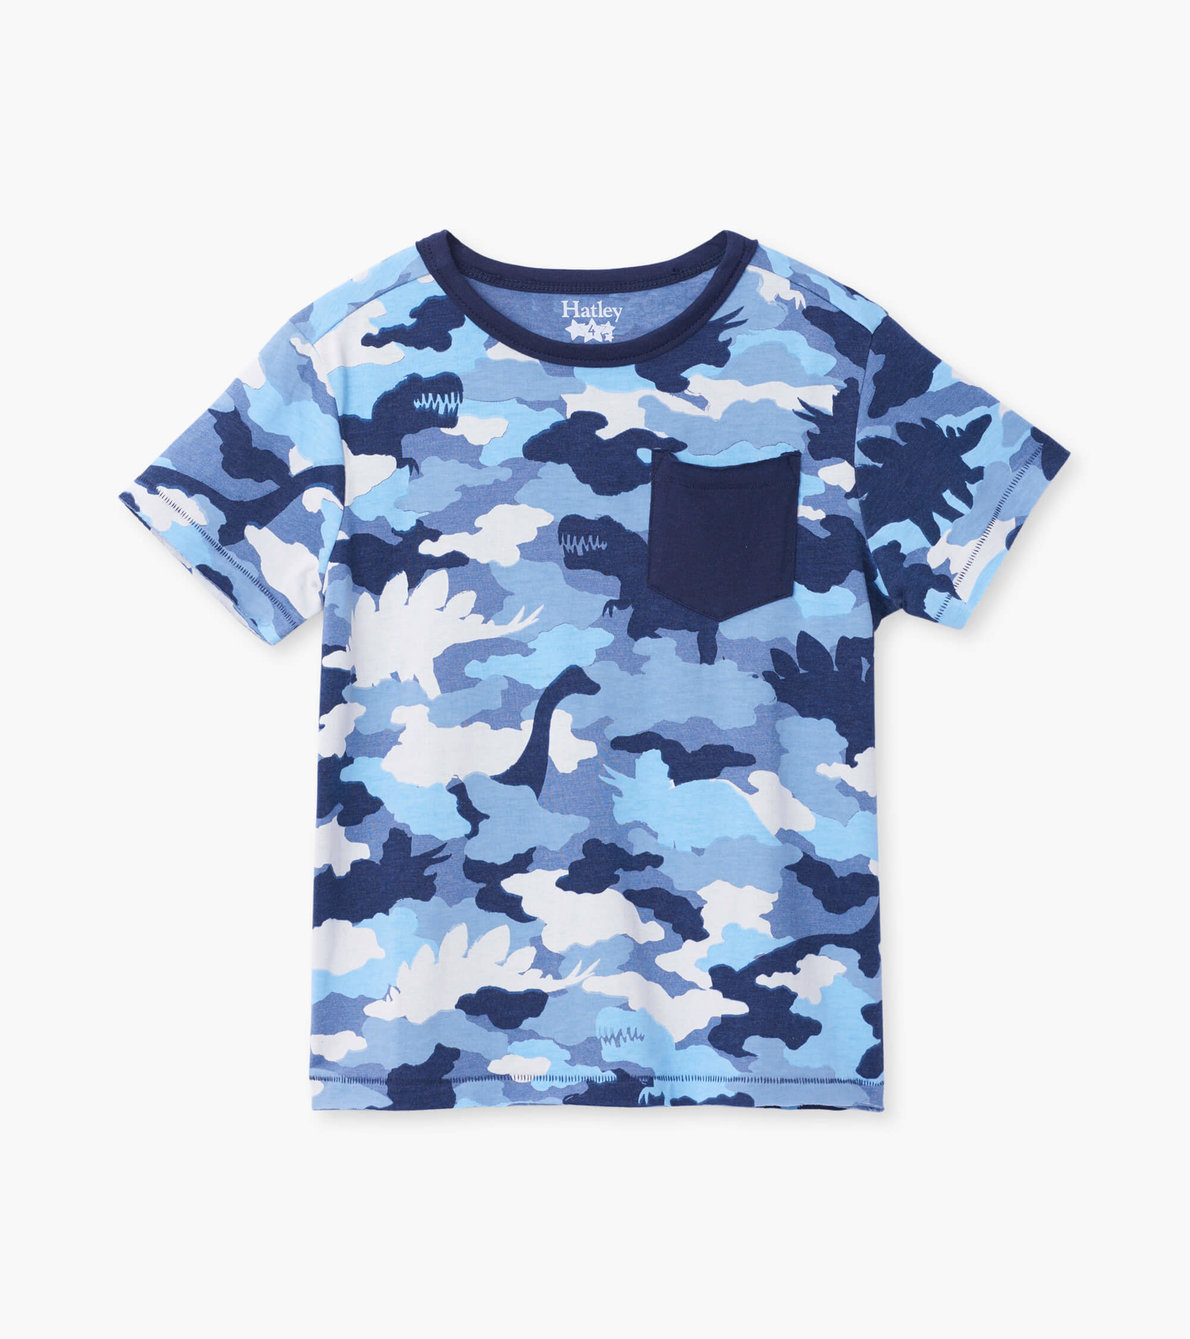 View larger image of Dino Camo Graphic Front Pocket Tee